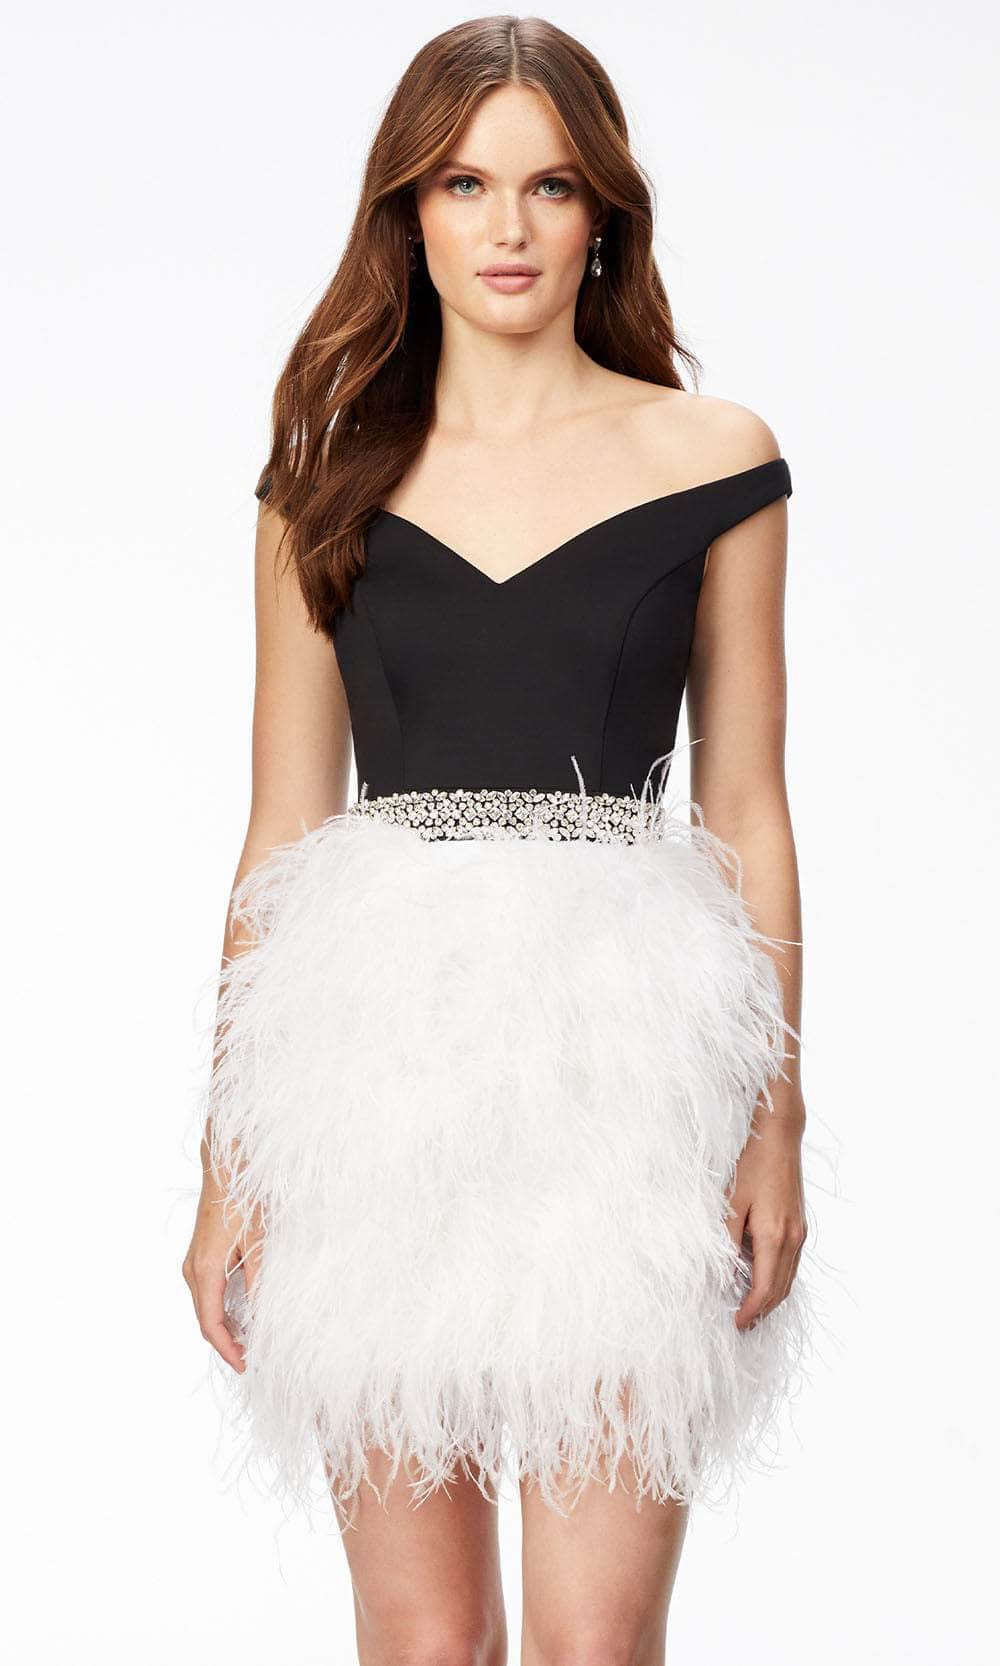 Image of Ashley Lauren 4536 - Feathered Skirt Cocktail Dress